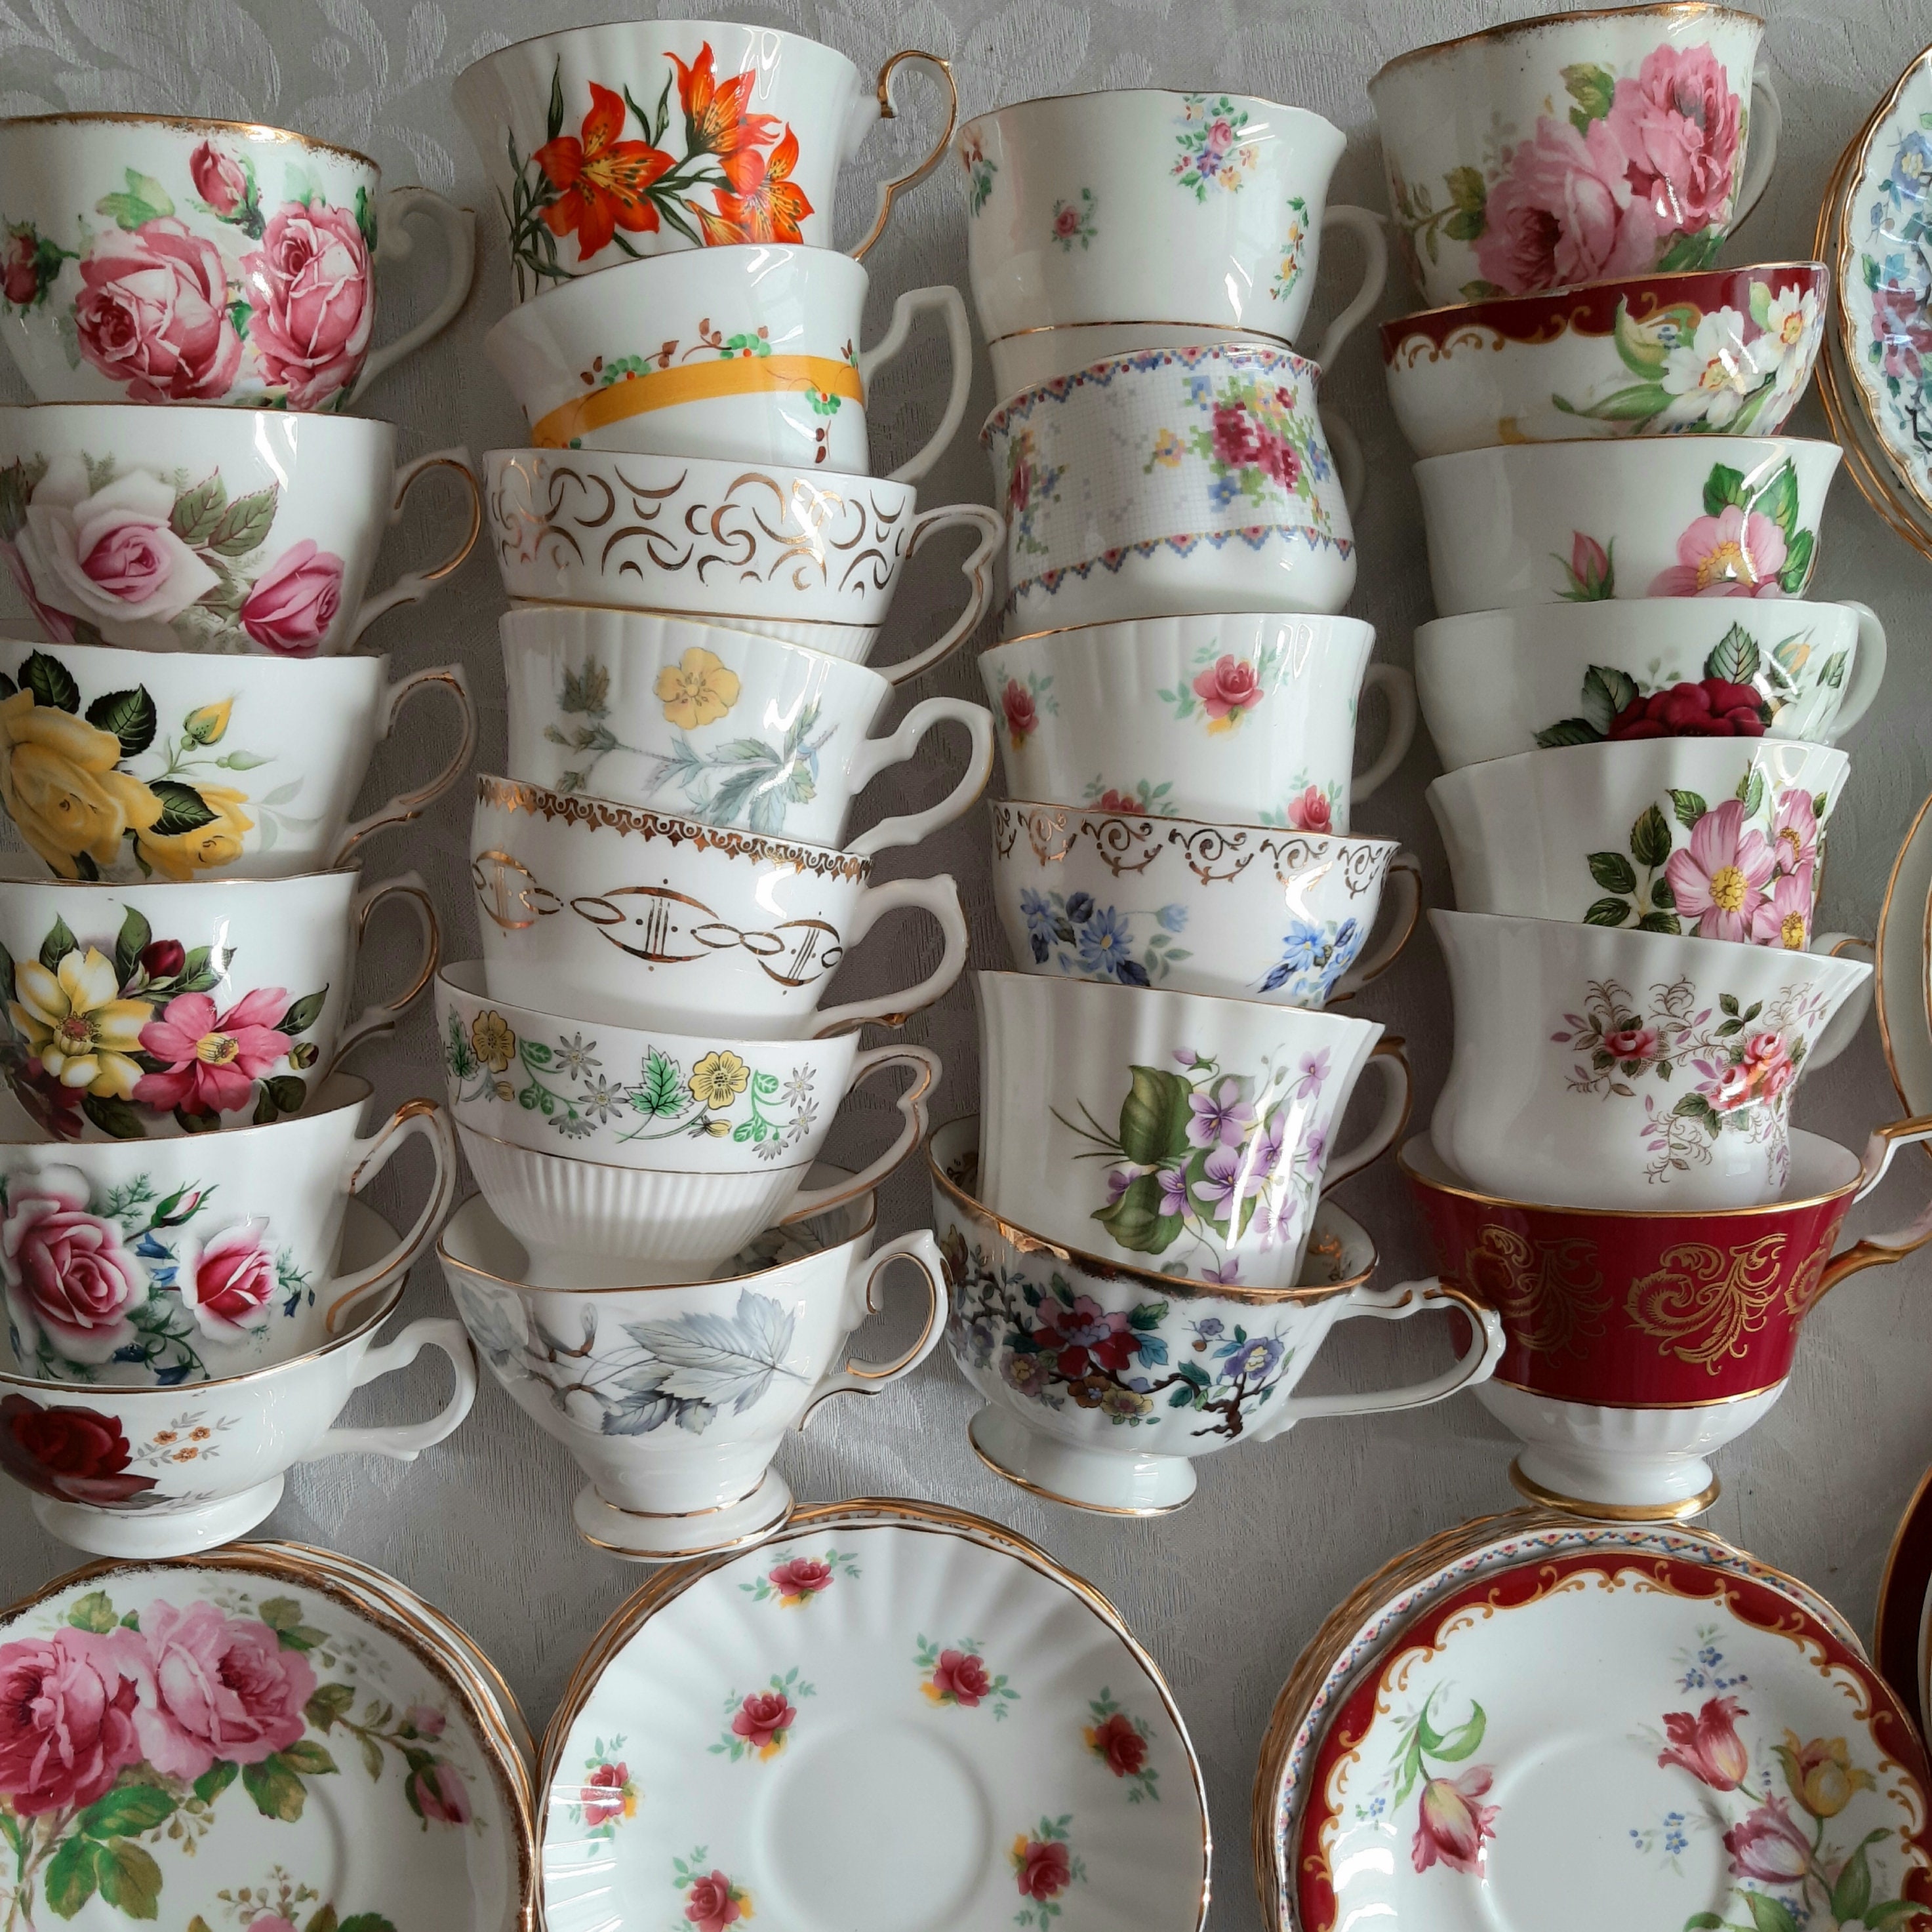 Vintage Afternoon Tea Sets Cup and Saucer Mix and Match